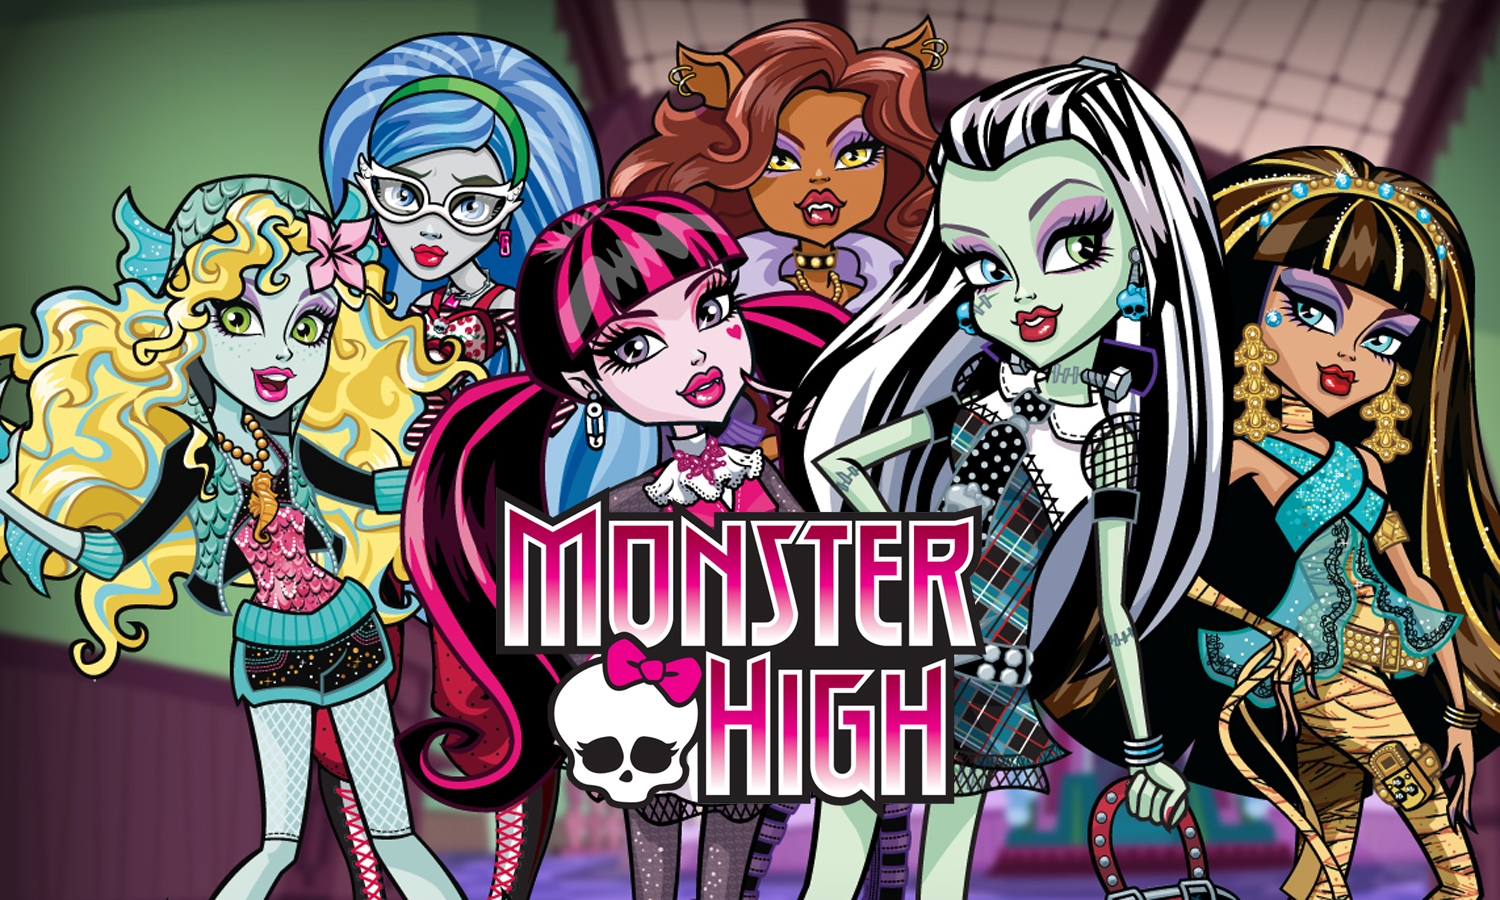 NickALive! Mattel and Nickelodeon to Produce New 'Monster High